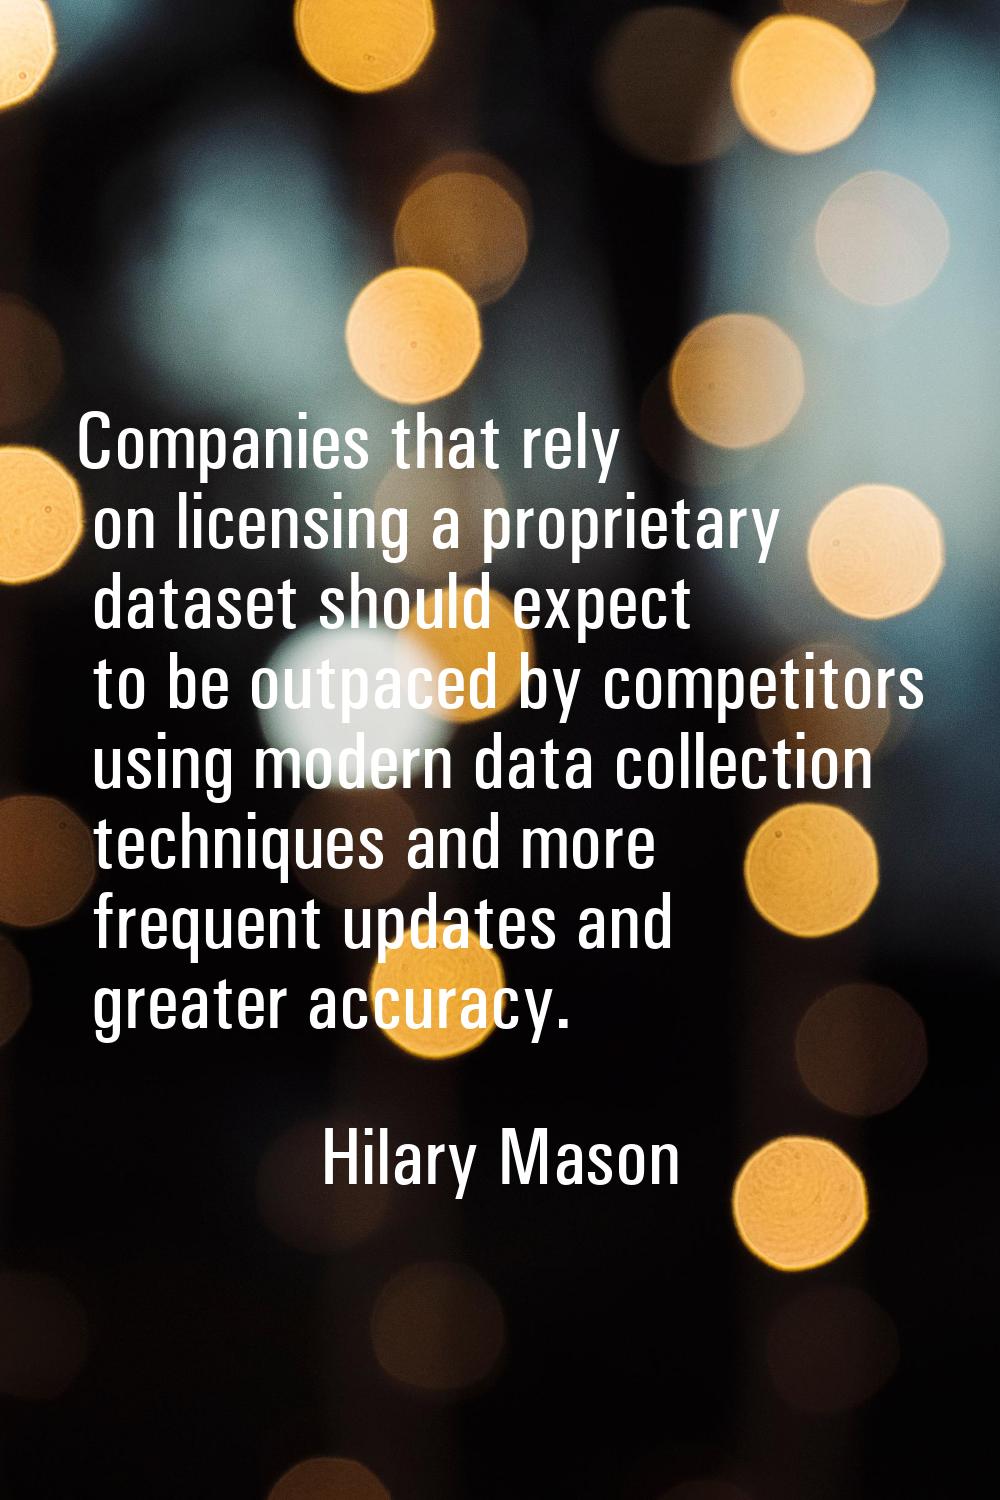 Companies that rely on licensing a proprietary dataset should expect to be outpaced by competitors 